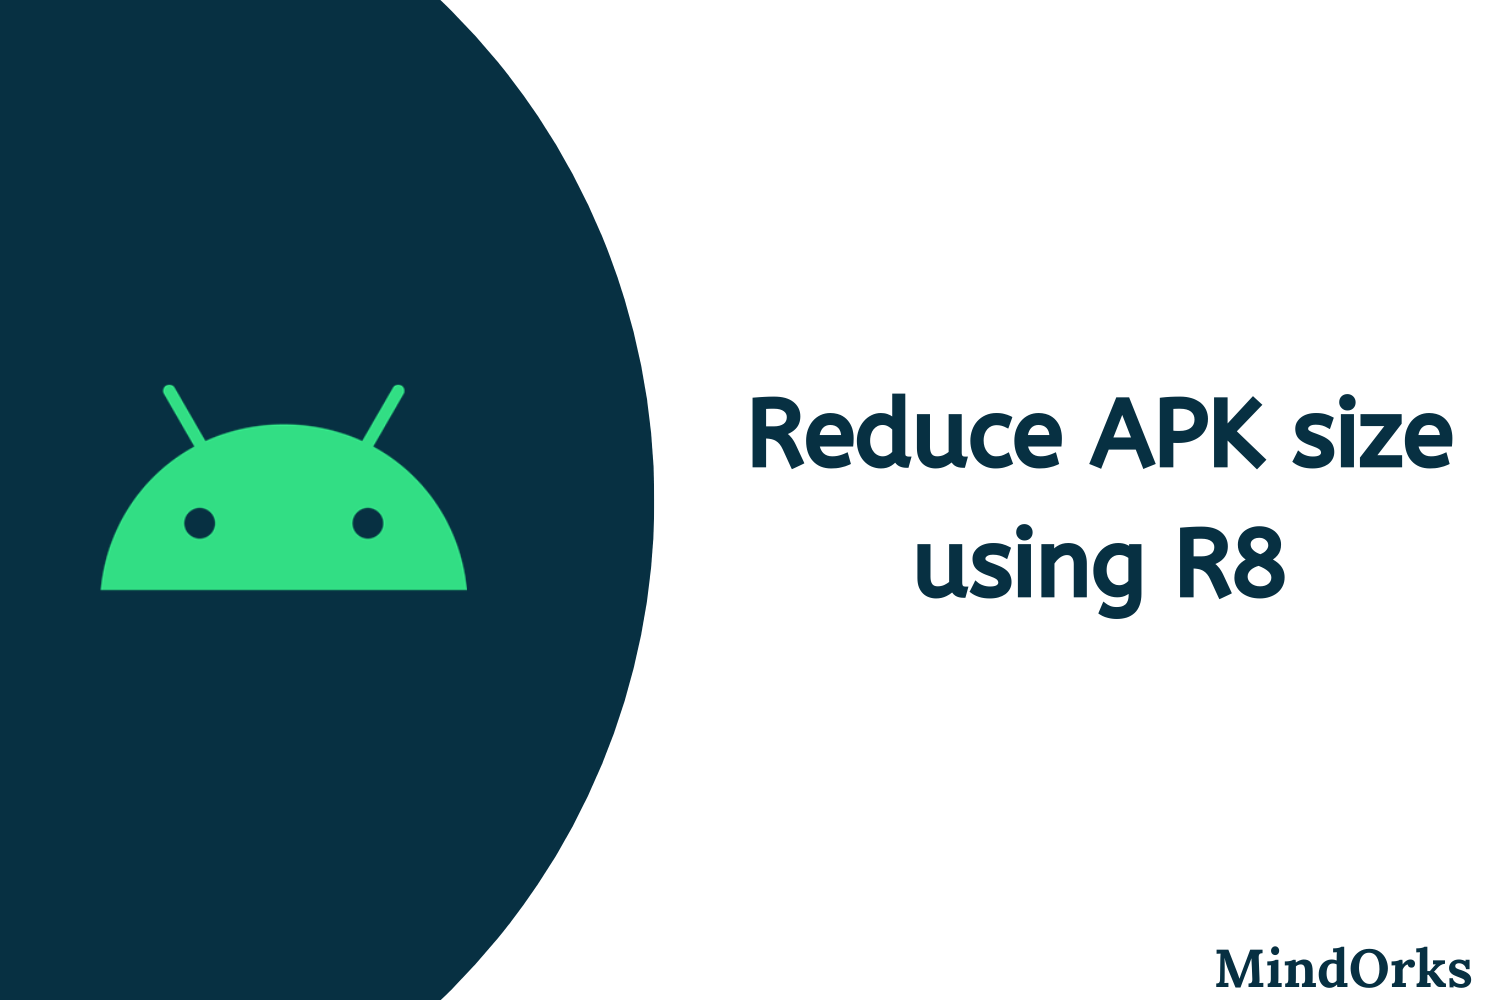 Using R8 to reduce APK size in Android